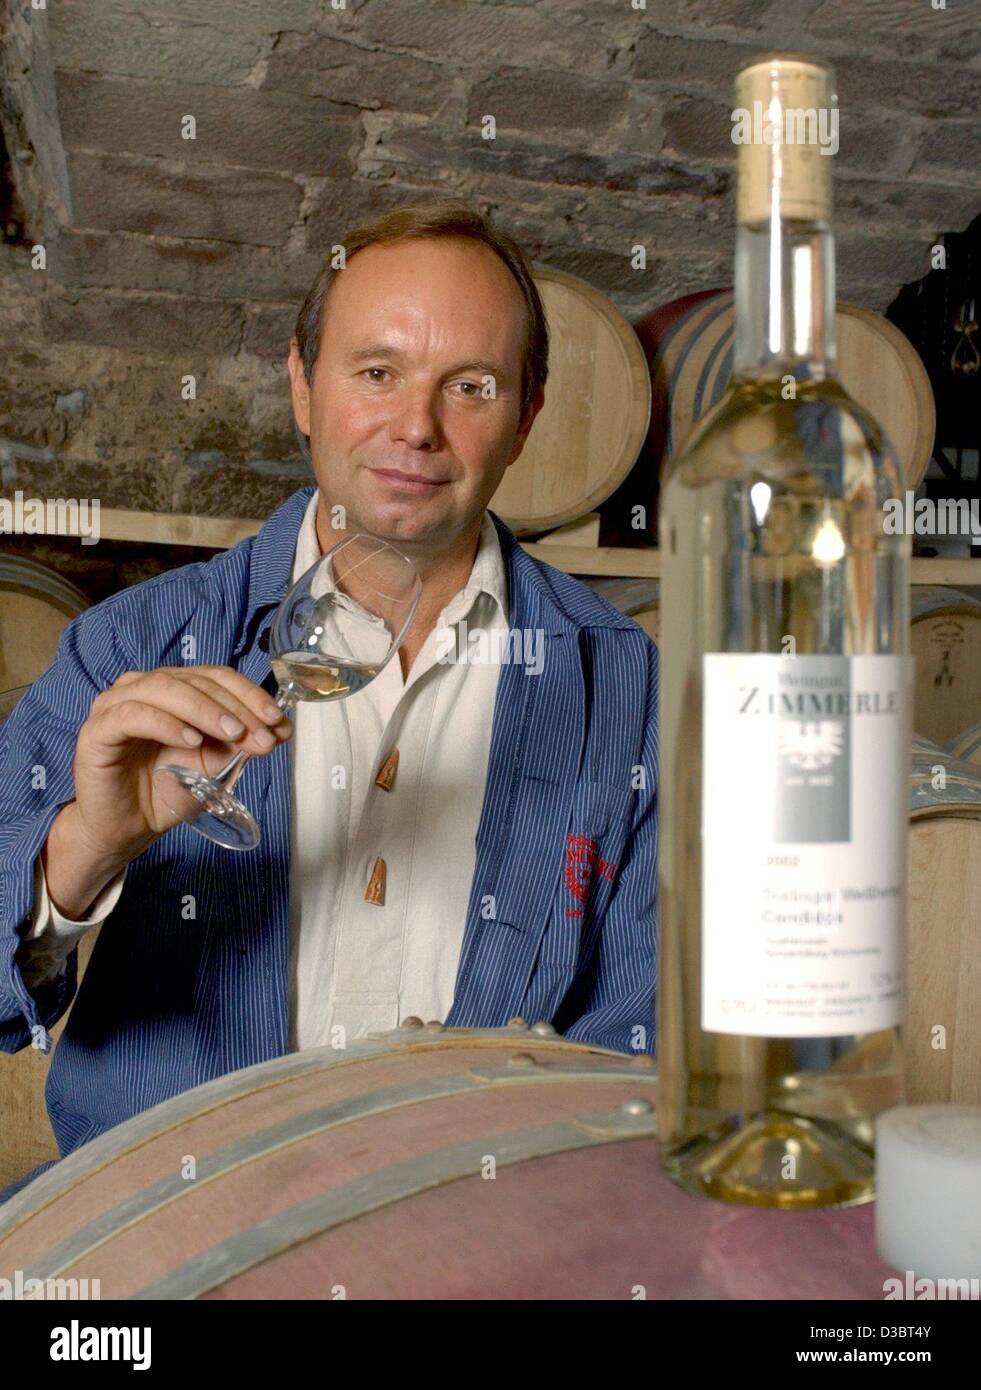 (dpa) - Wine grower Friedrich Zimmerle presents a bottle of transparent white wine made from red Trollinger grapes, in Korb, southern Germany, 10 September 2003. This unique wine creation, which is created by an untypical pressing and fermenting of the Trollinger grapes, is against all traditions of Stock Photo